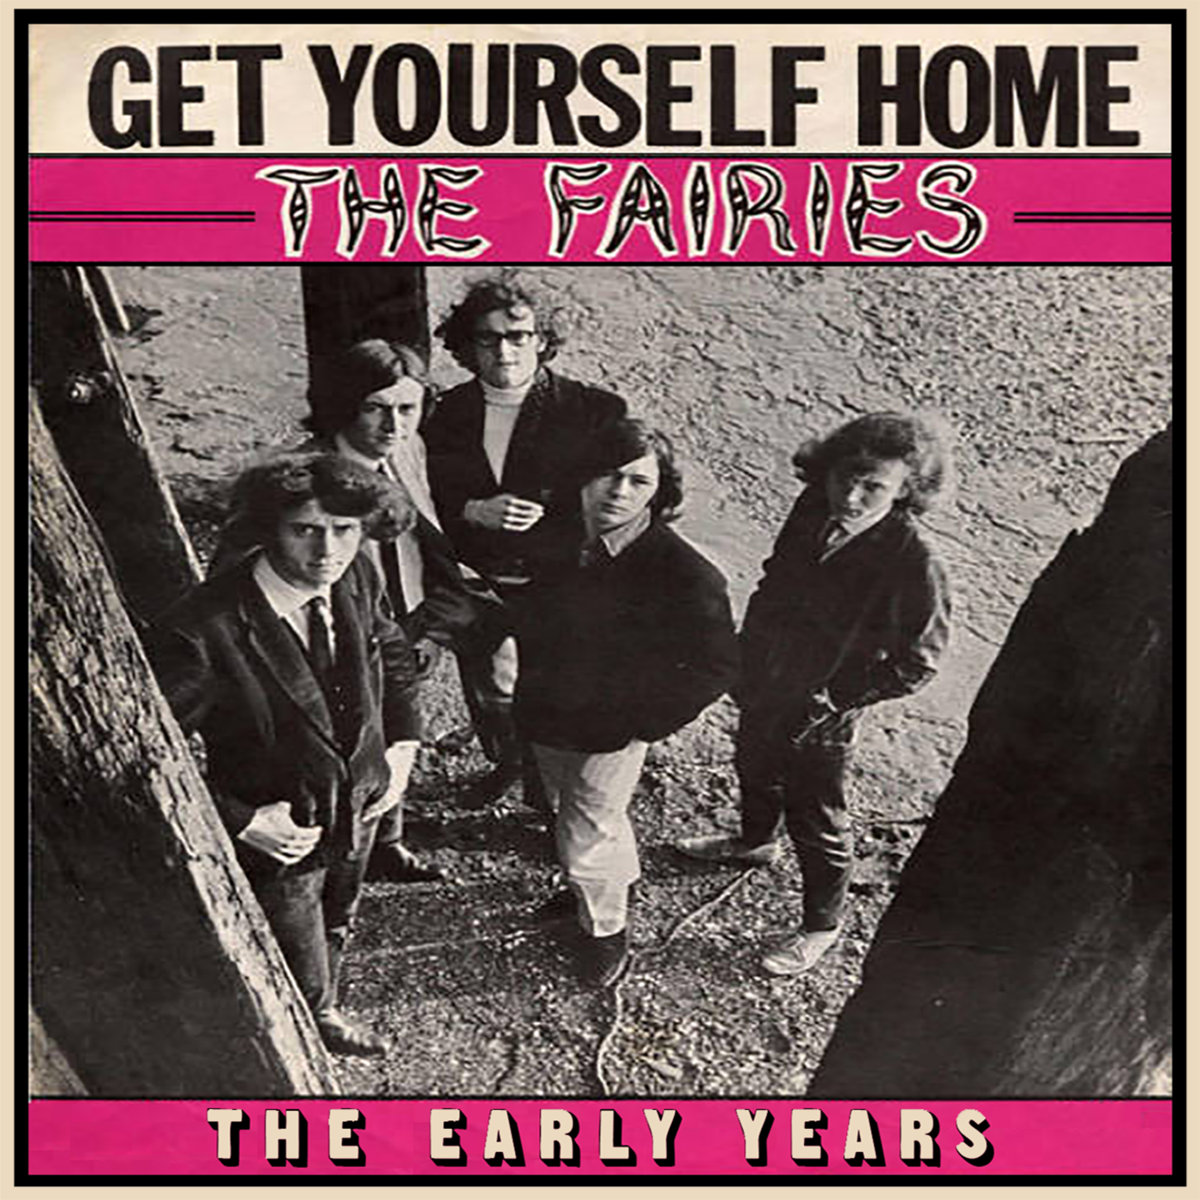 FAIRIES / GET YOURSELF HOME: THE EARLY YEARS (CDR)